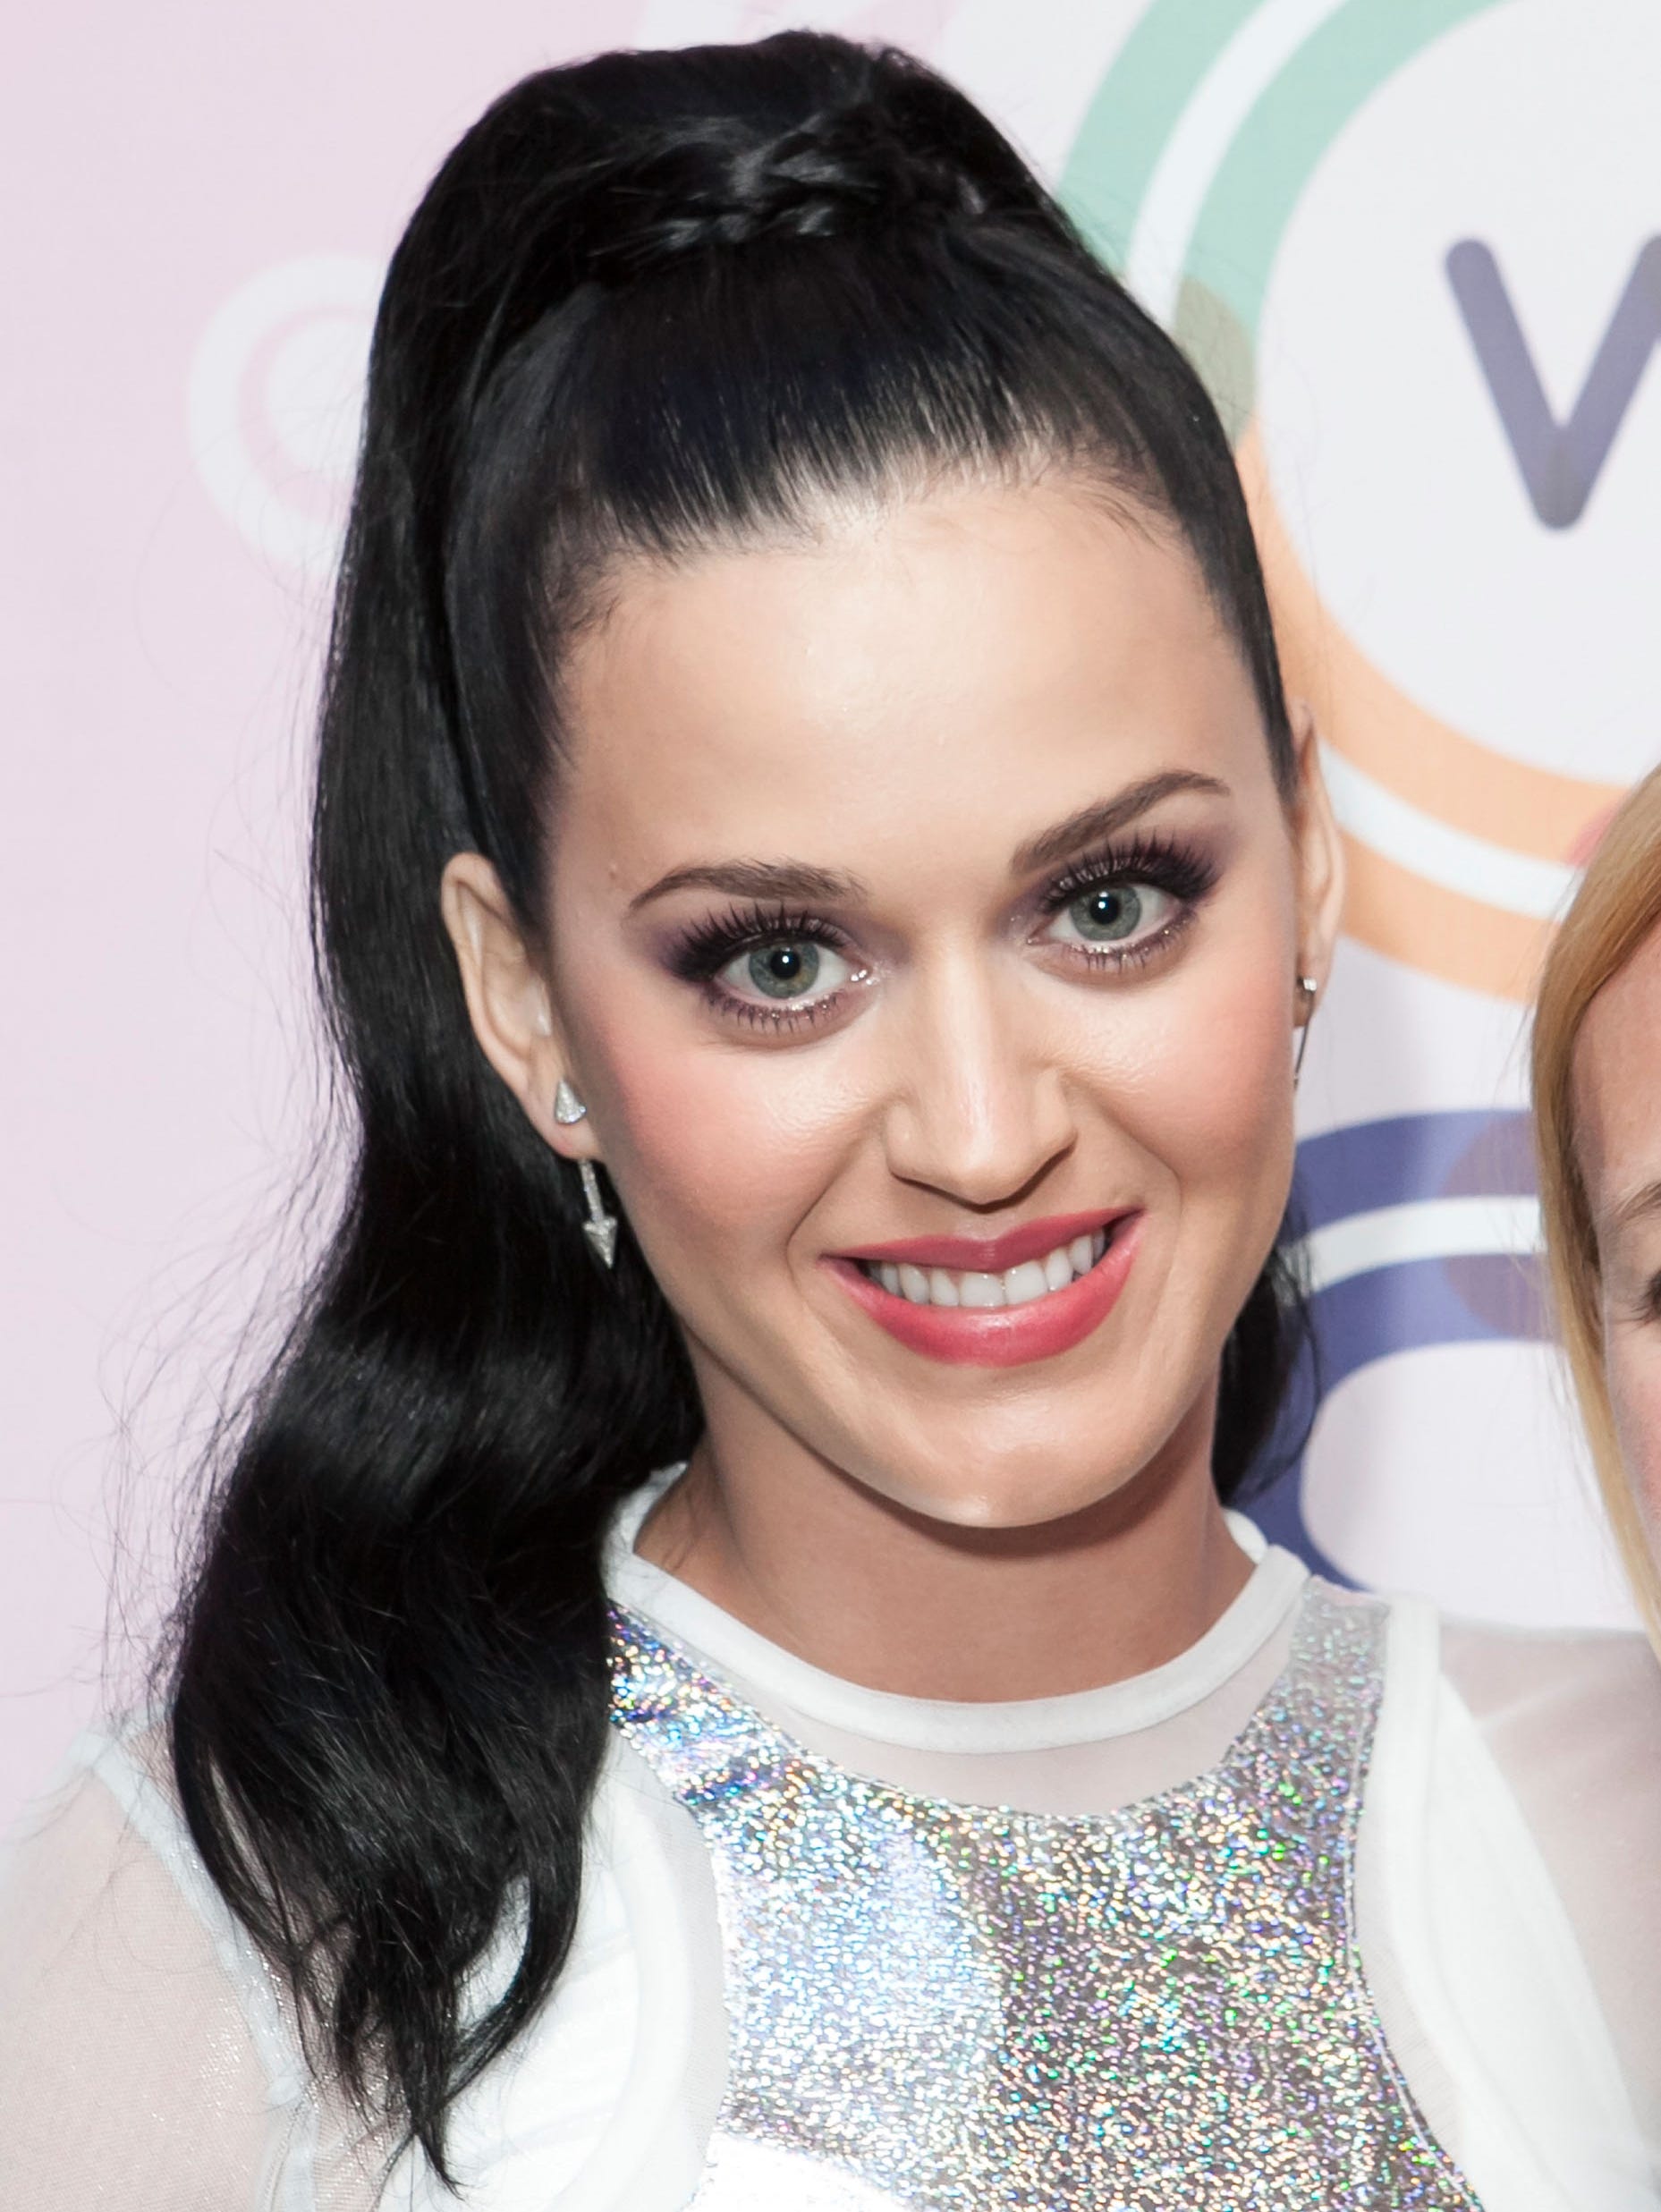 asmaa nabawy recommends naked pictures katy perry pic